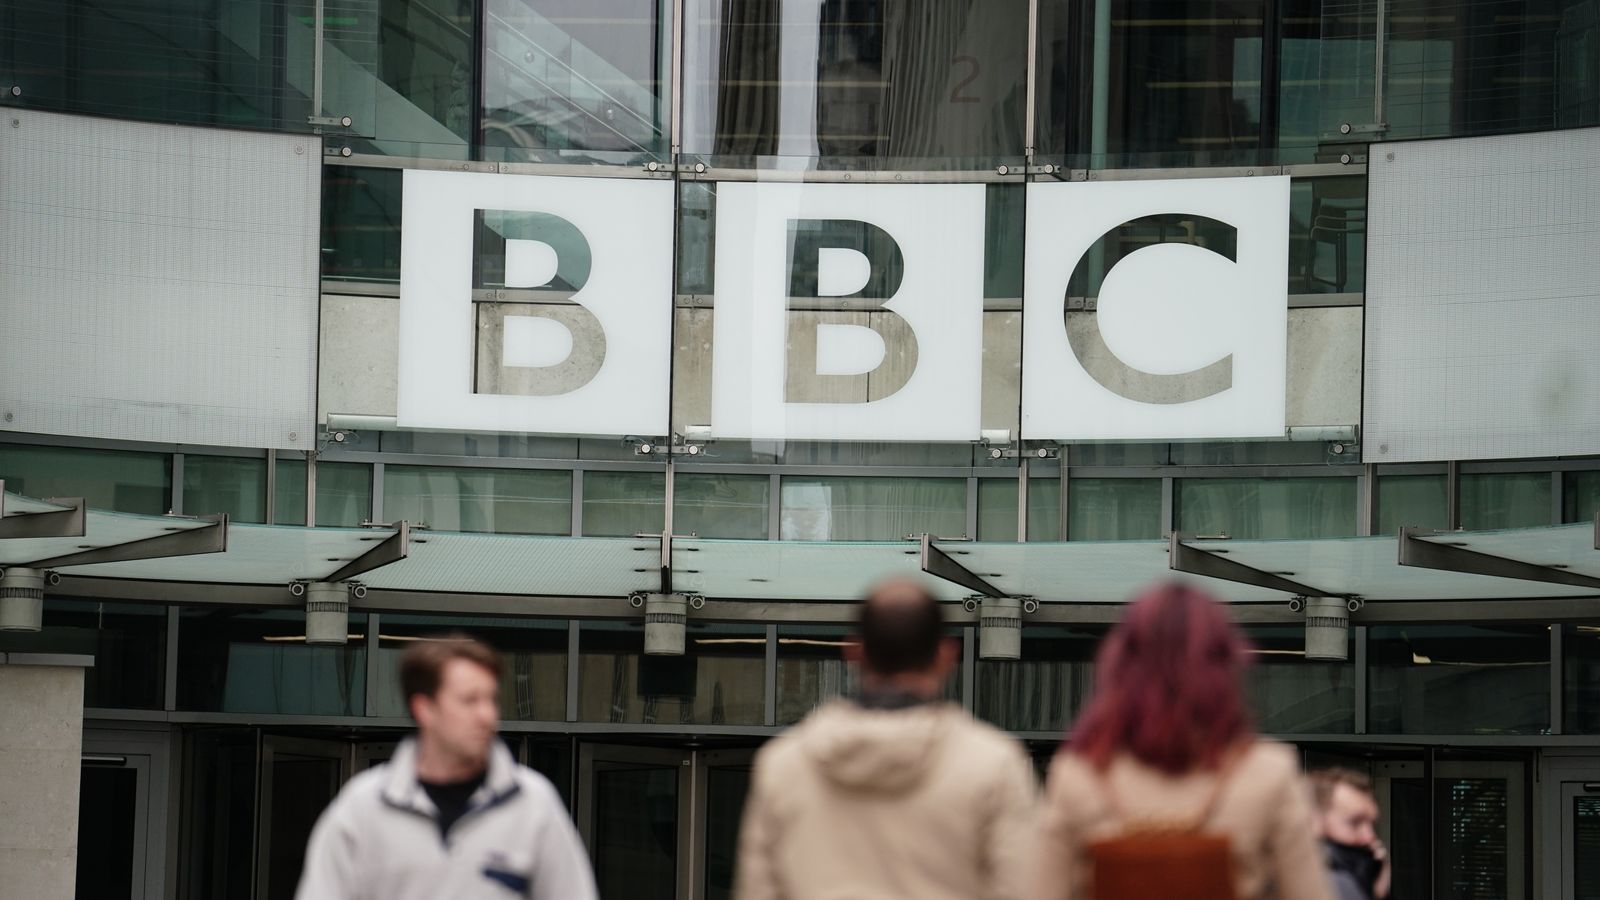 Bbc Presenter Accused Of Paying Teen For Sexually Explicit Photos Tried To Stop Investigation 